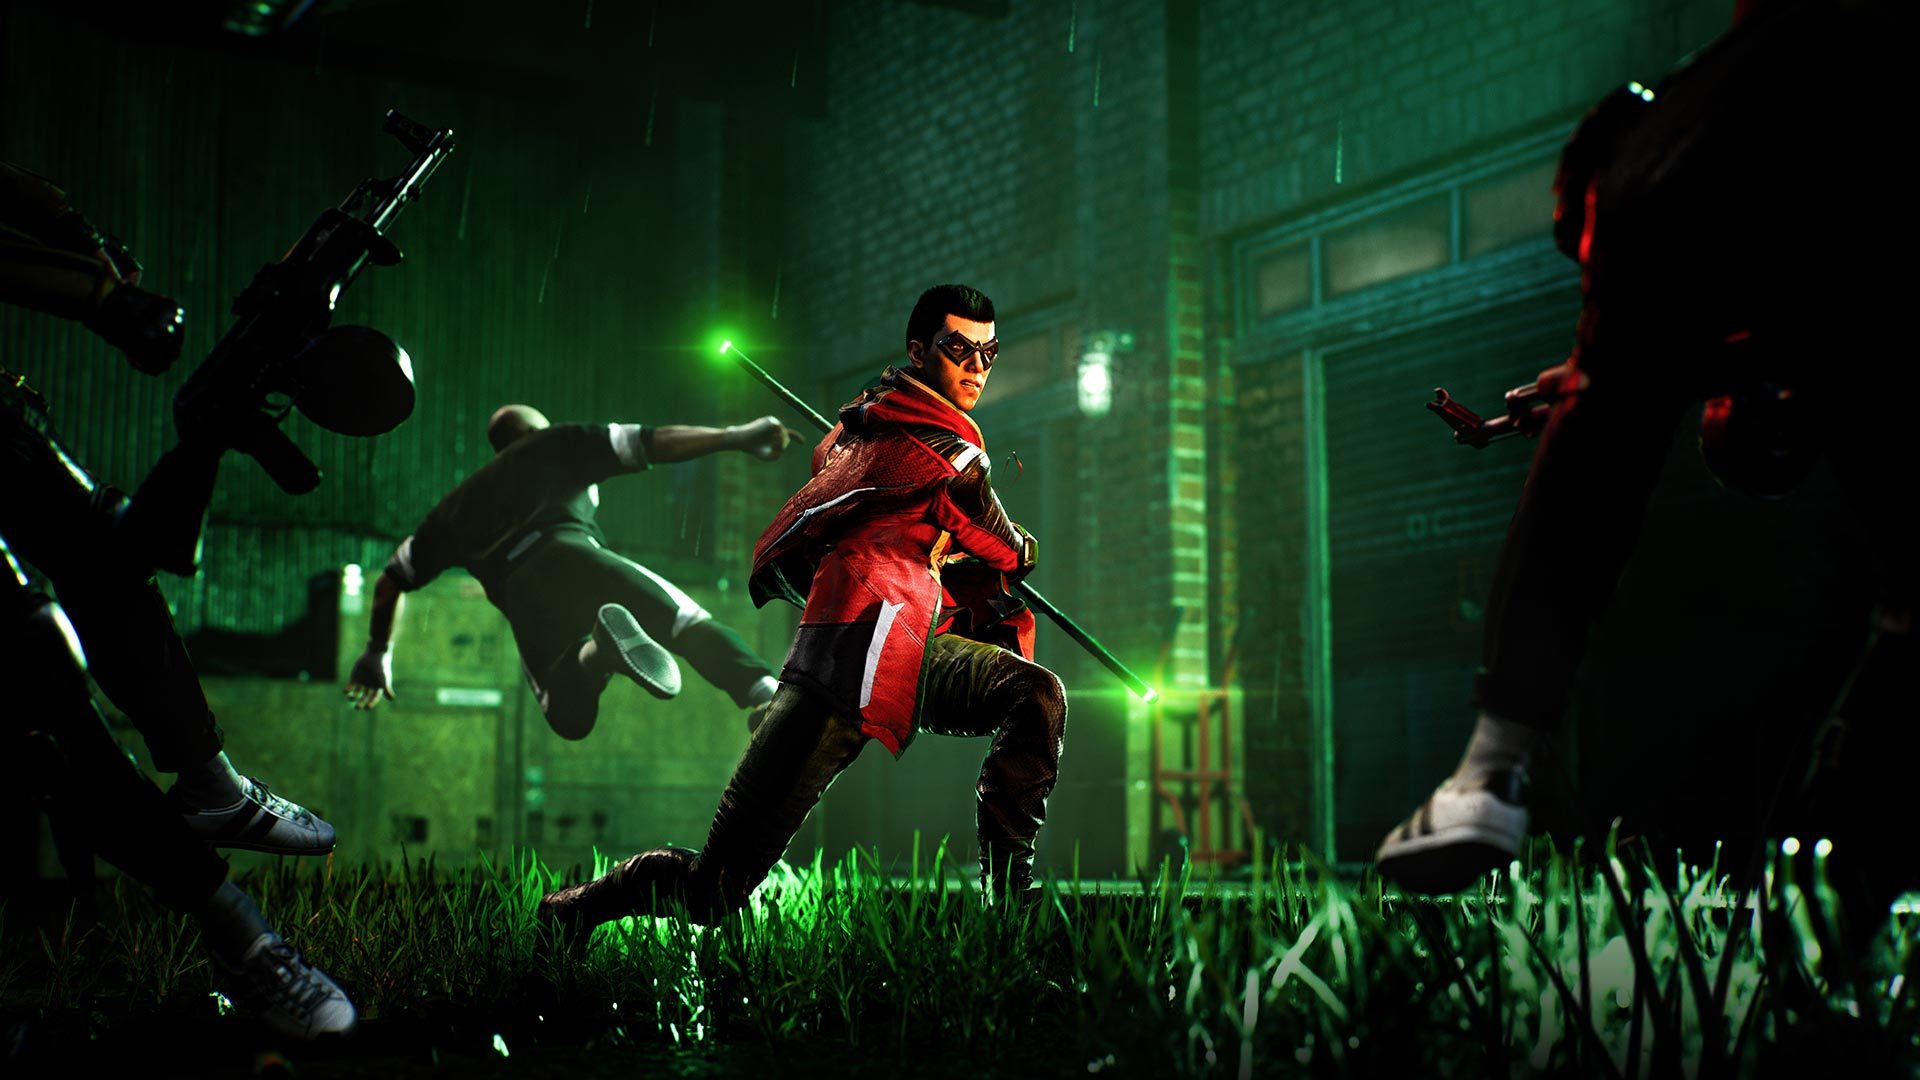 Gotham Knights Best Robin Skills: Robin can be seen pulling off a wide sweep attack